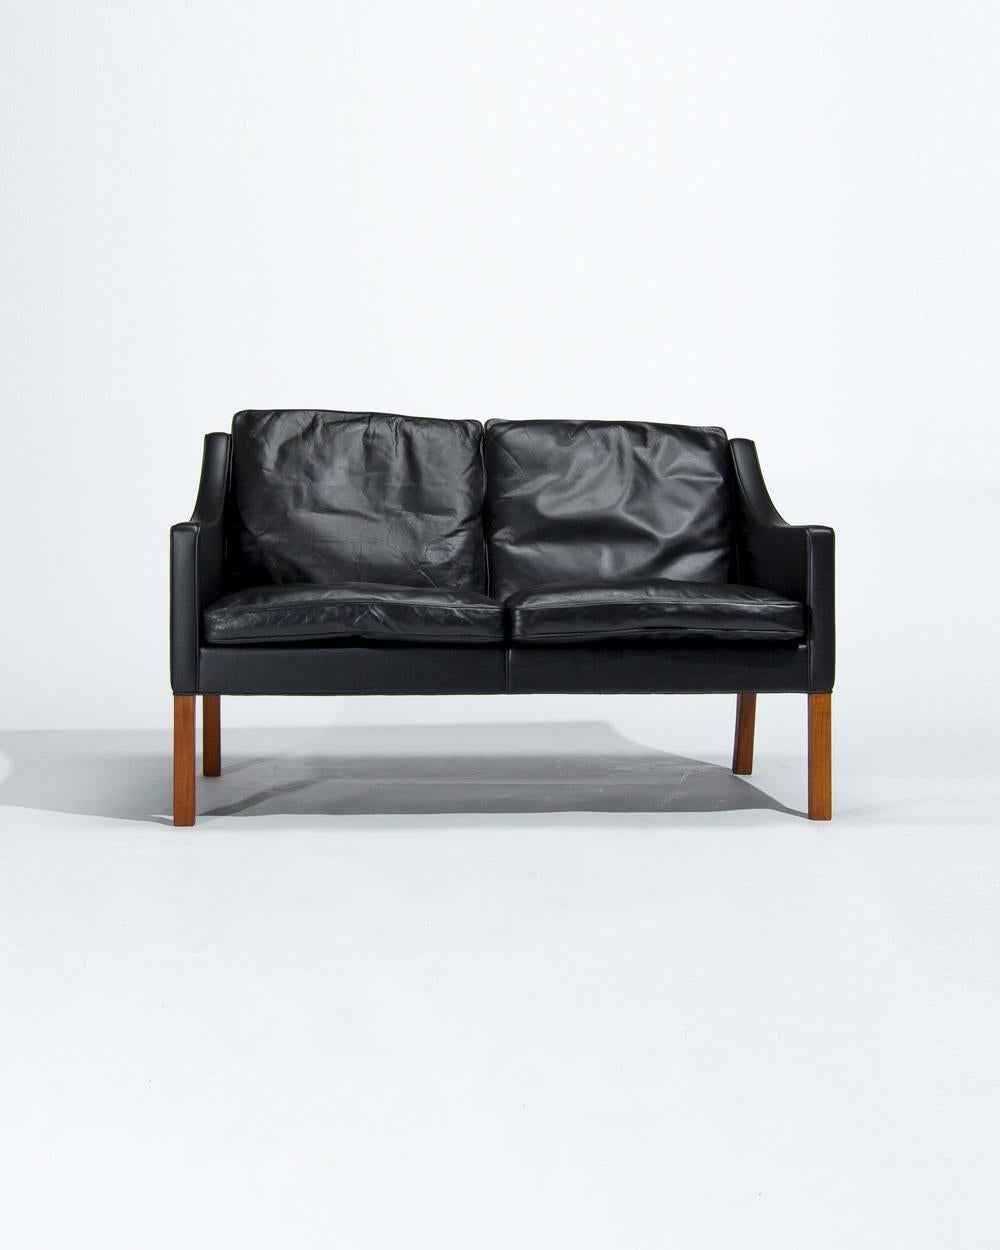 A beautiful midcentury leather sofa designed by Borge Mogensen and made by Fredericia Stolefabrik in the 1960s. An interesting design the model 2208 sofa has elegant and simple form made using the finest leather with mahogany legs.

As with the